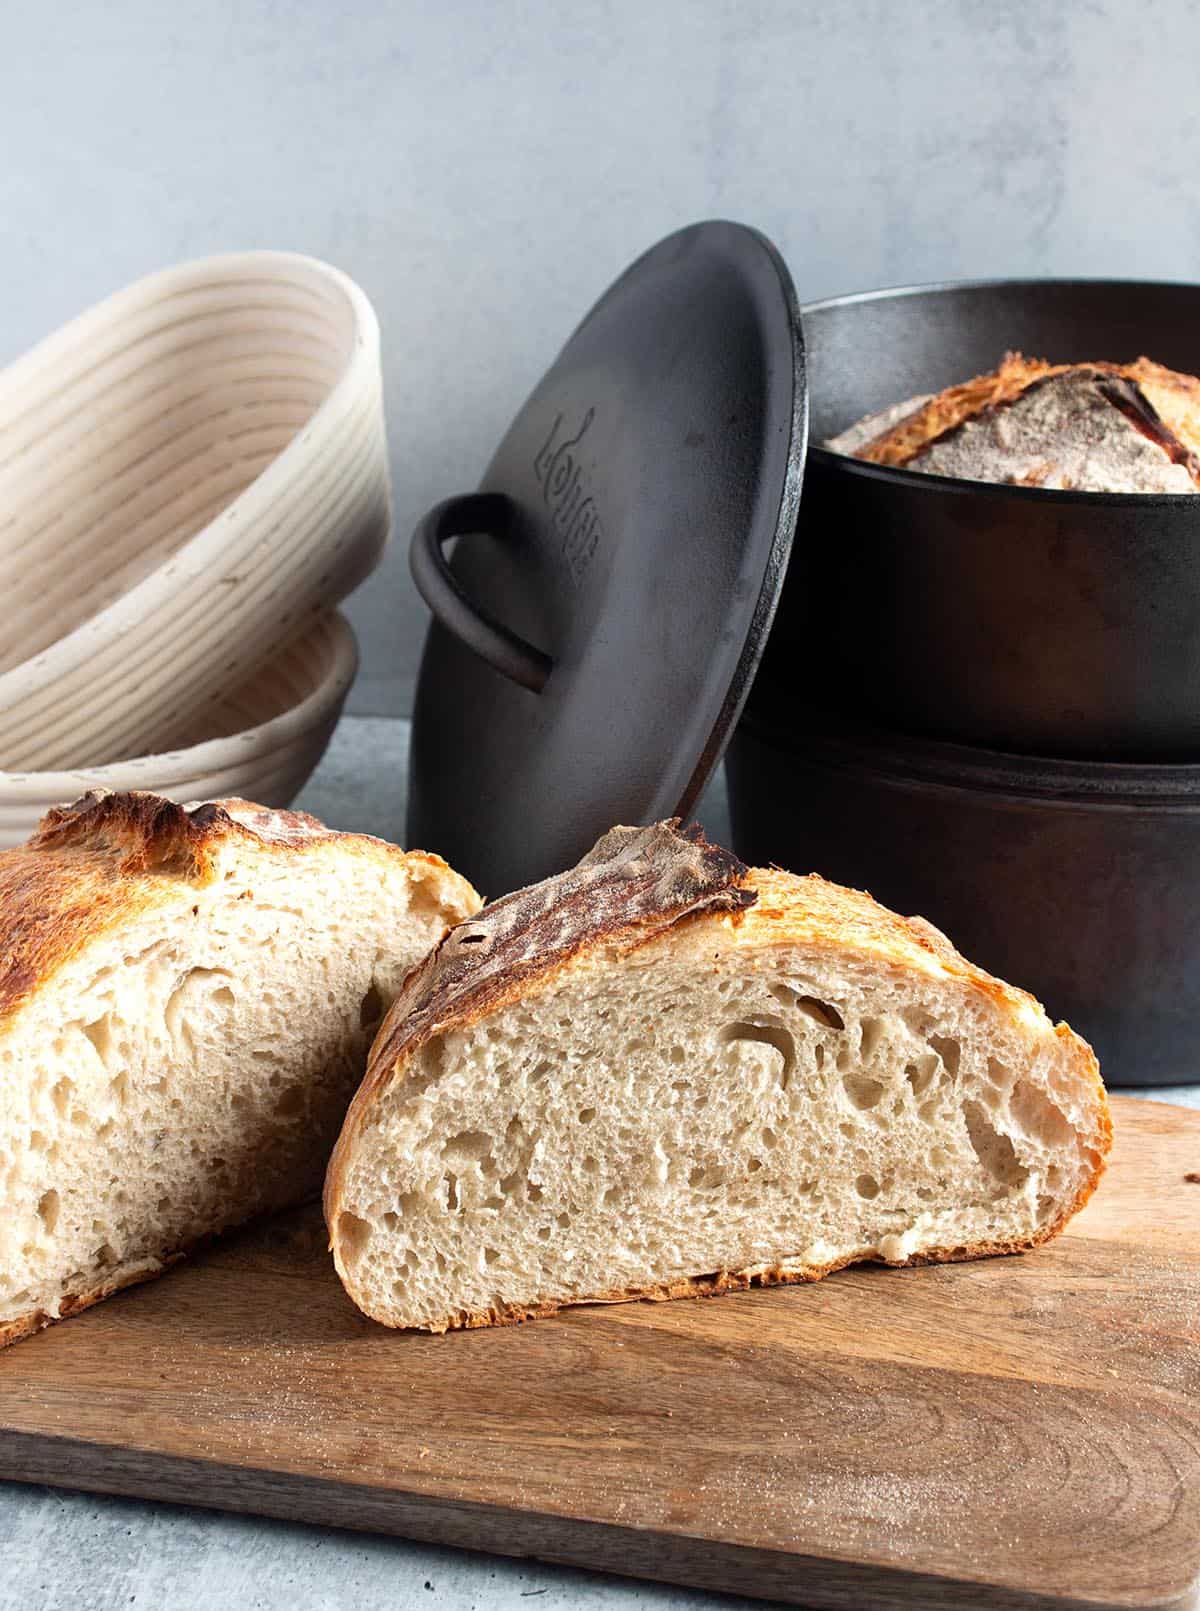 Loaf of sourdough bread with bannetons and a cast iron dutch oven with a loaf inside.